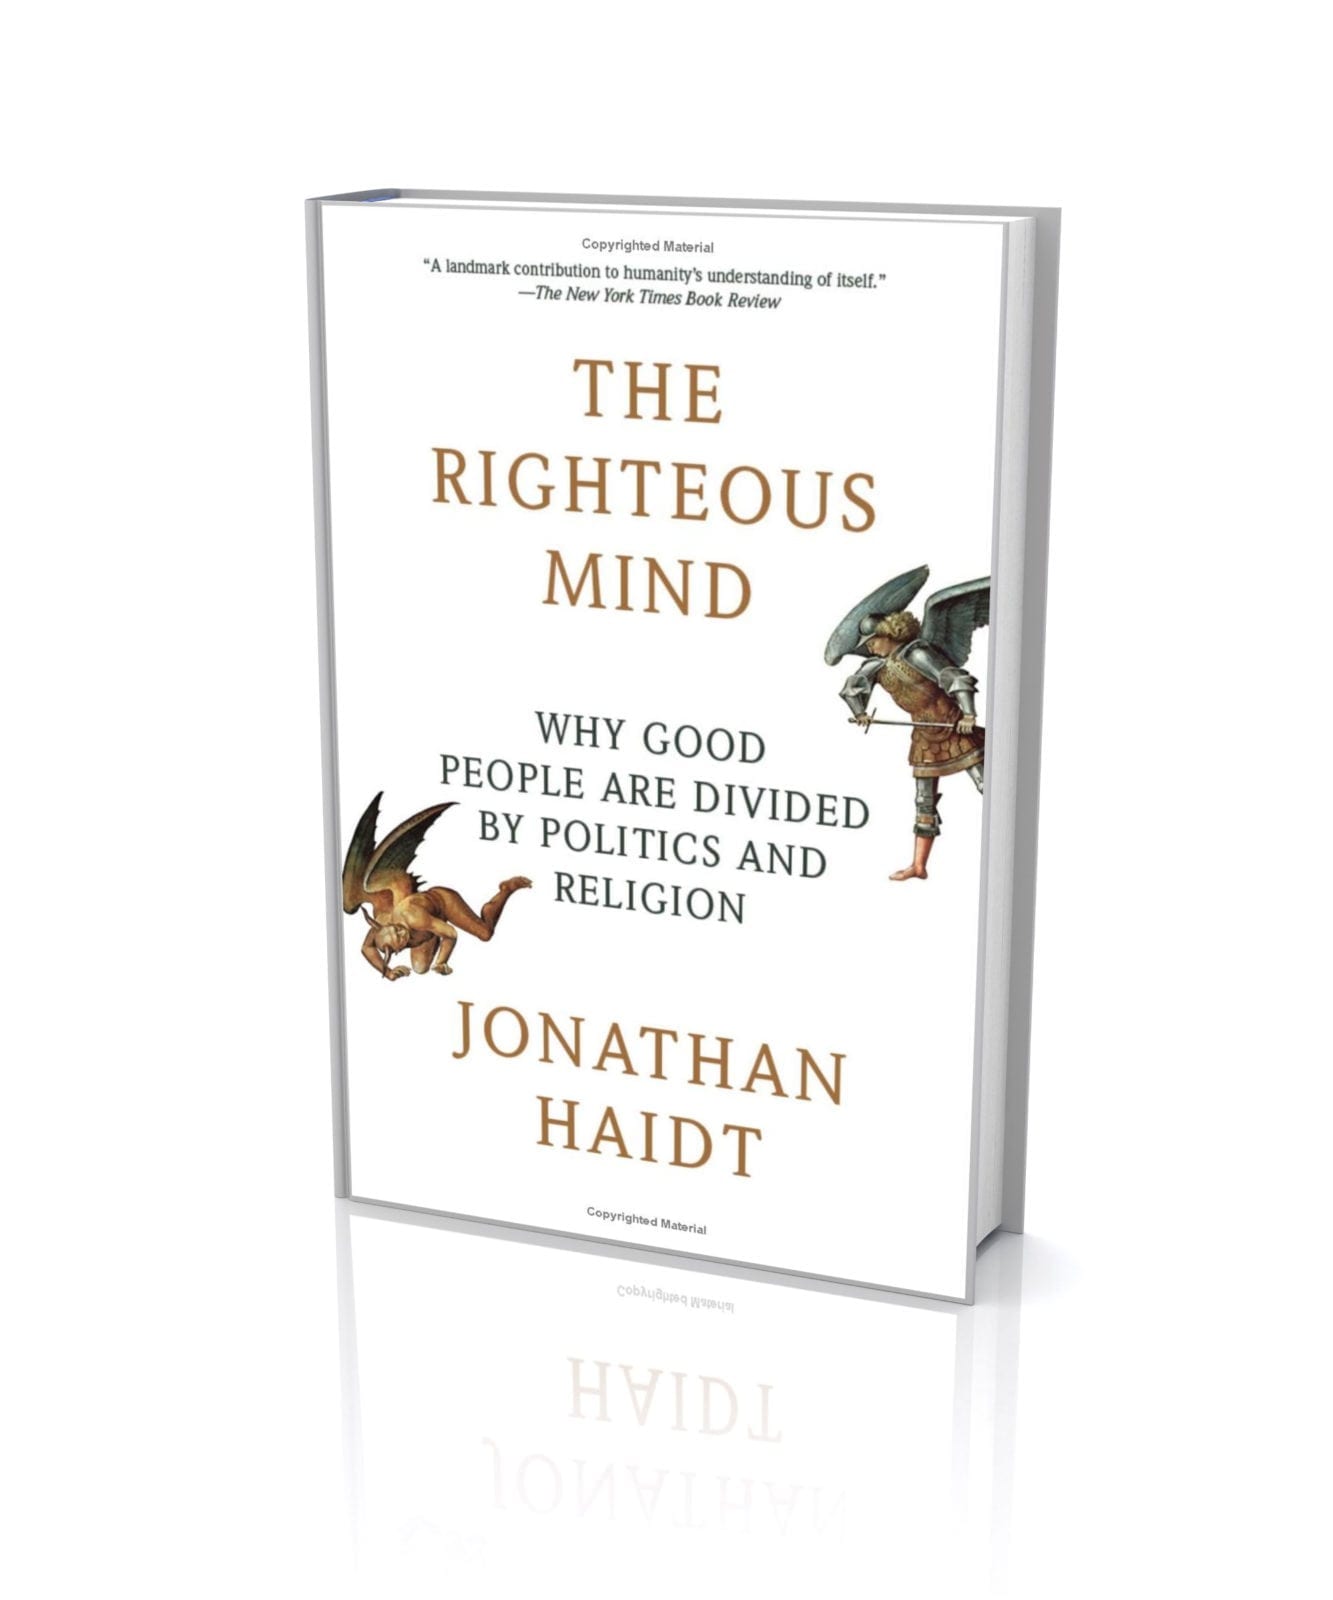 The Righteous Mind by Jonathan Haidt